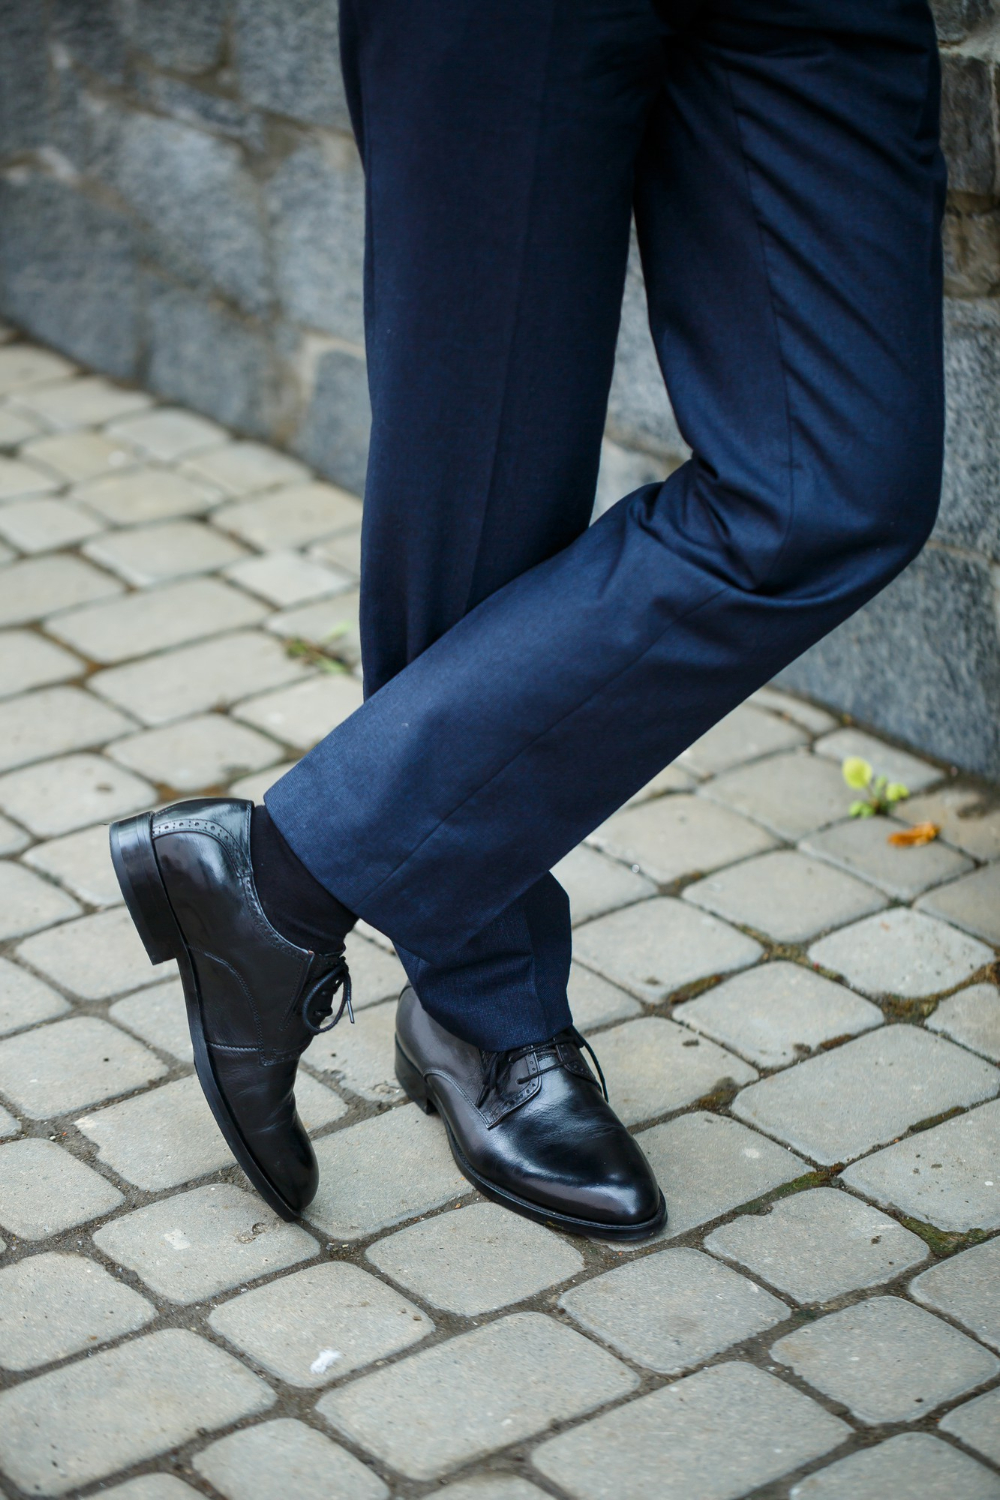 Navy pants and black shoe styles that match